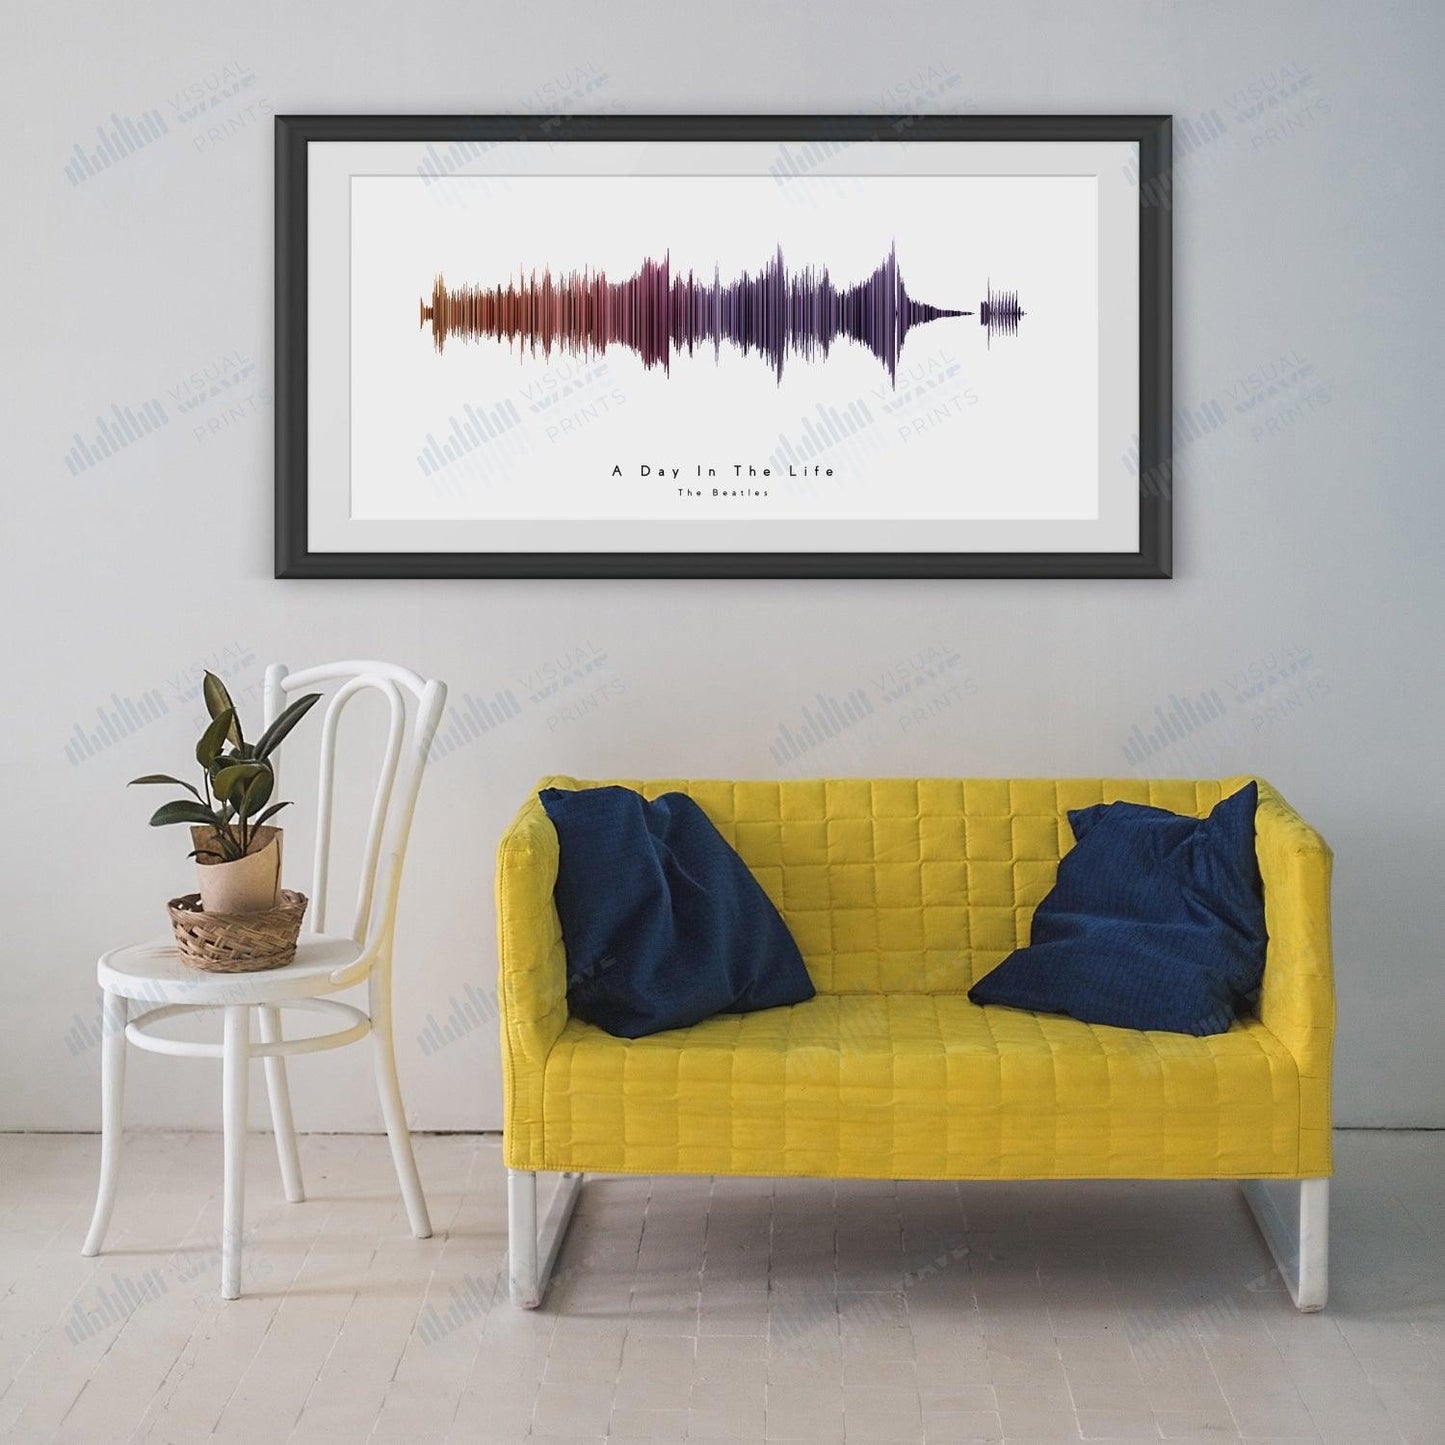 A Day in the Life by The Beatles - Visual Wave Prints